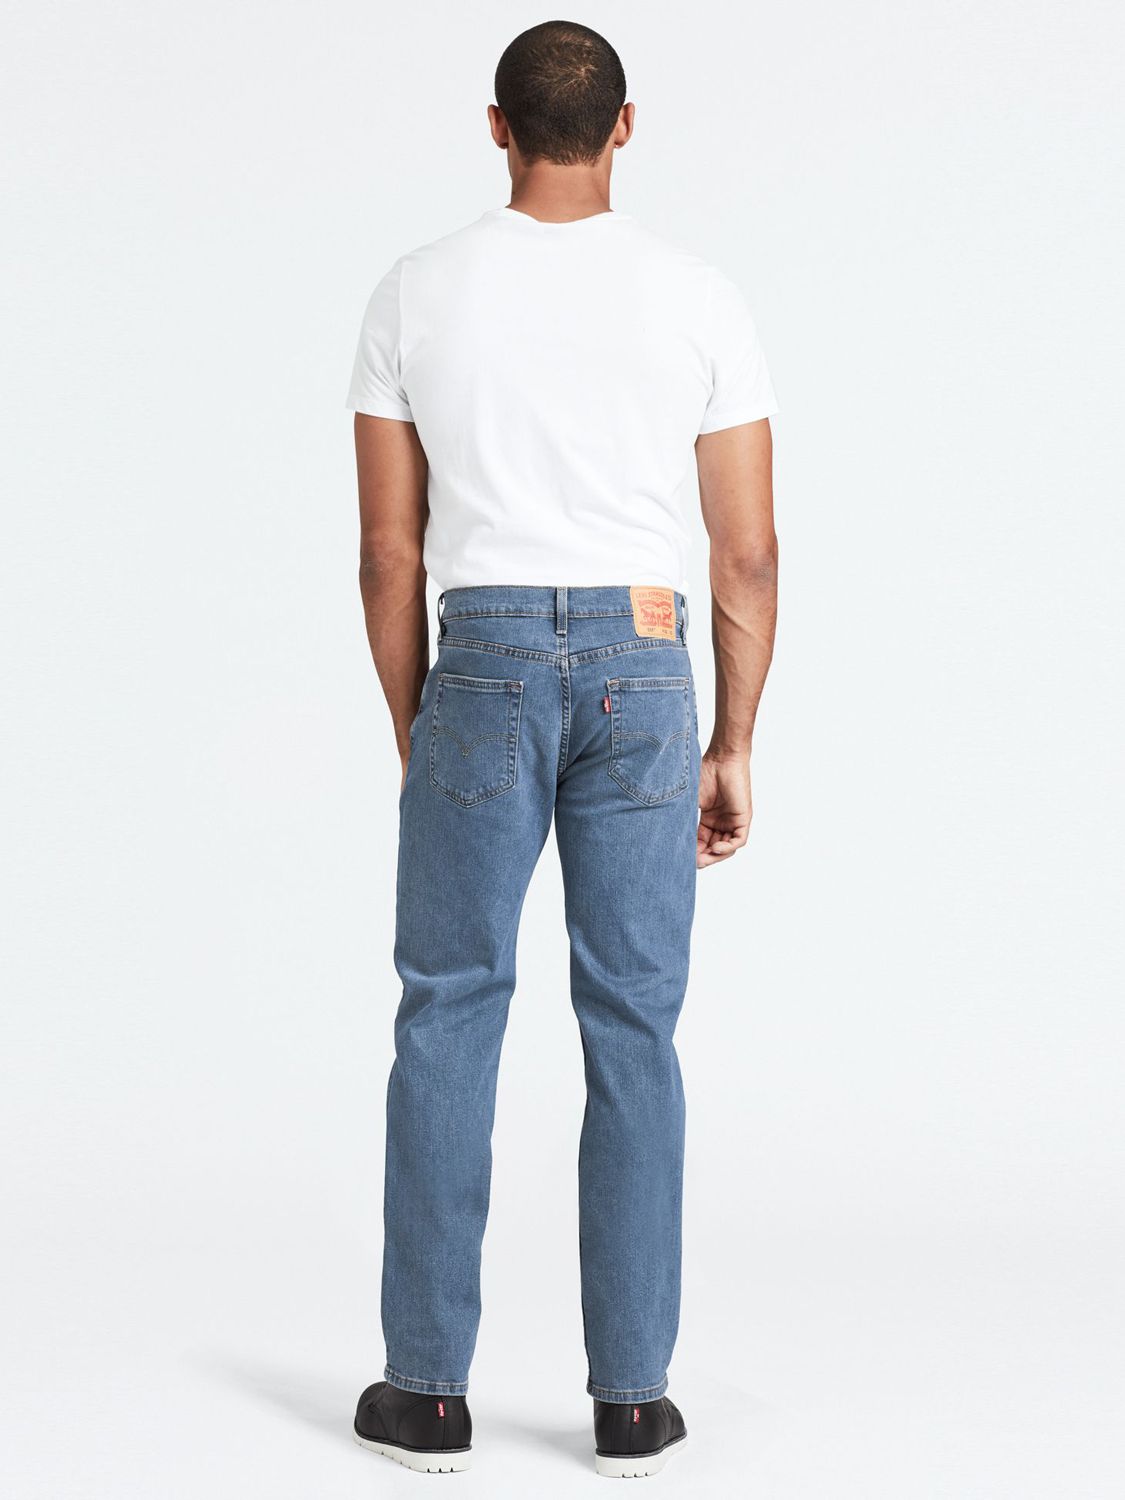 Buy Levi's 514 Straight Cut Jeans Online at johnlewis.com